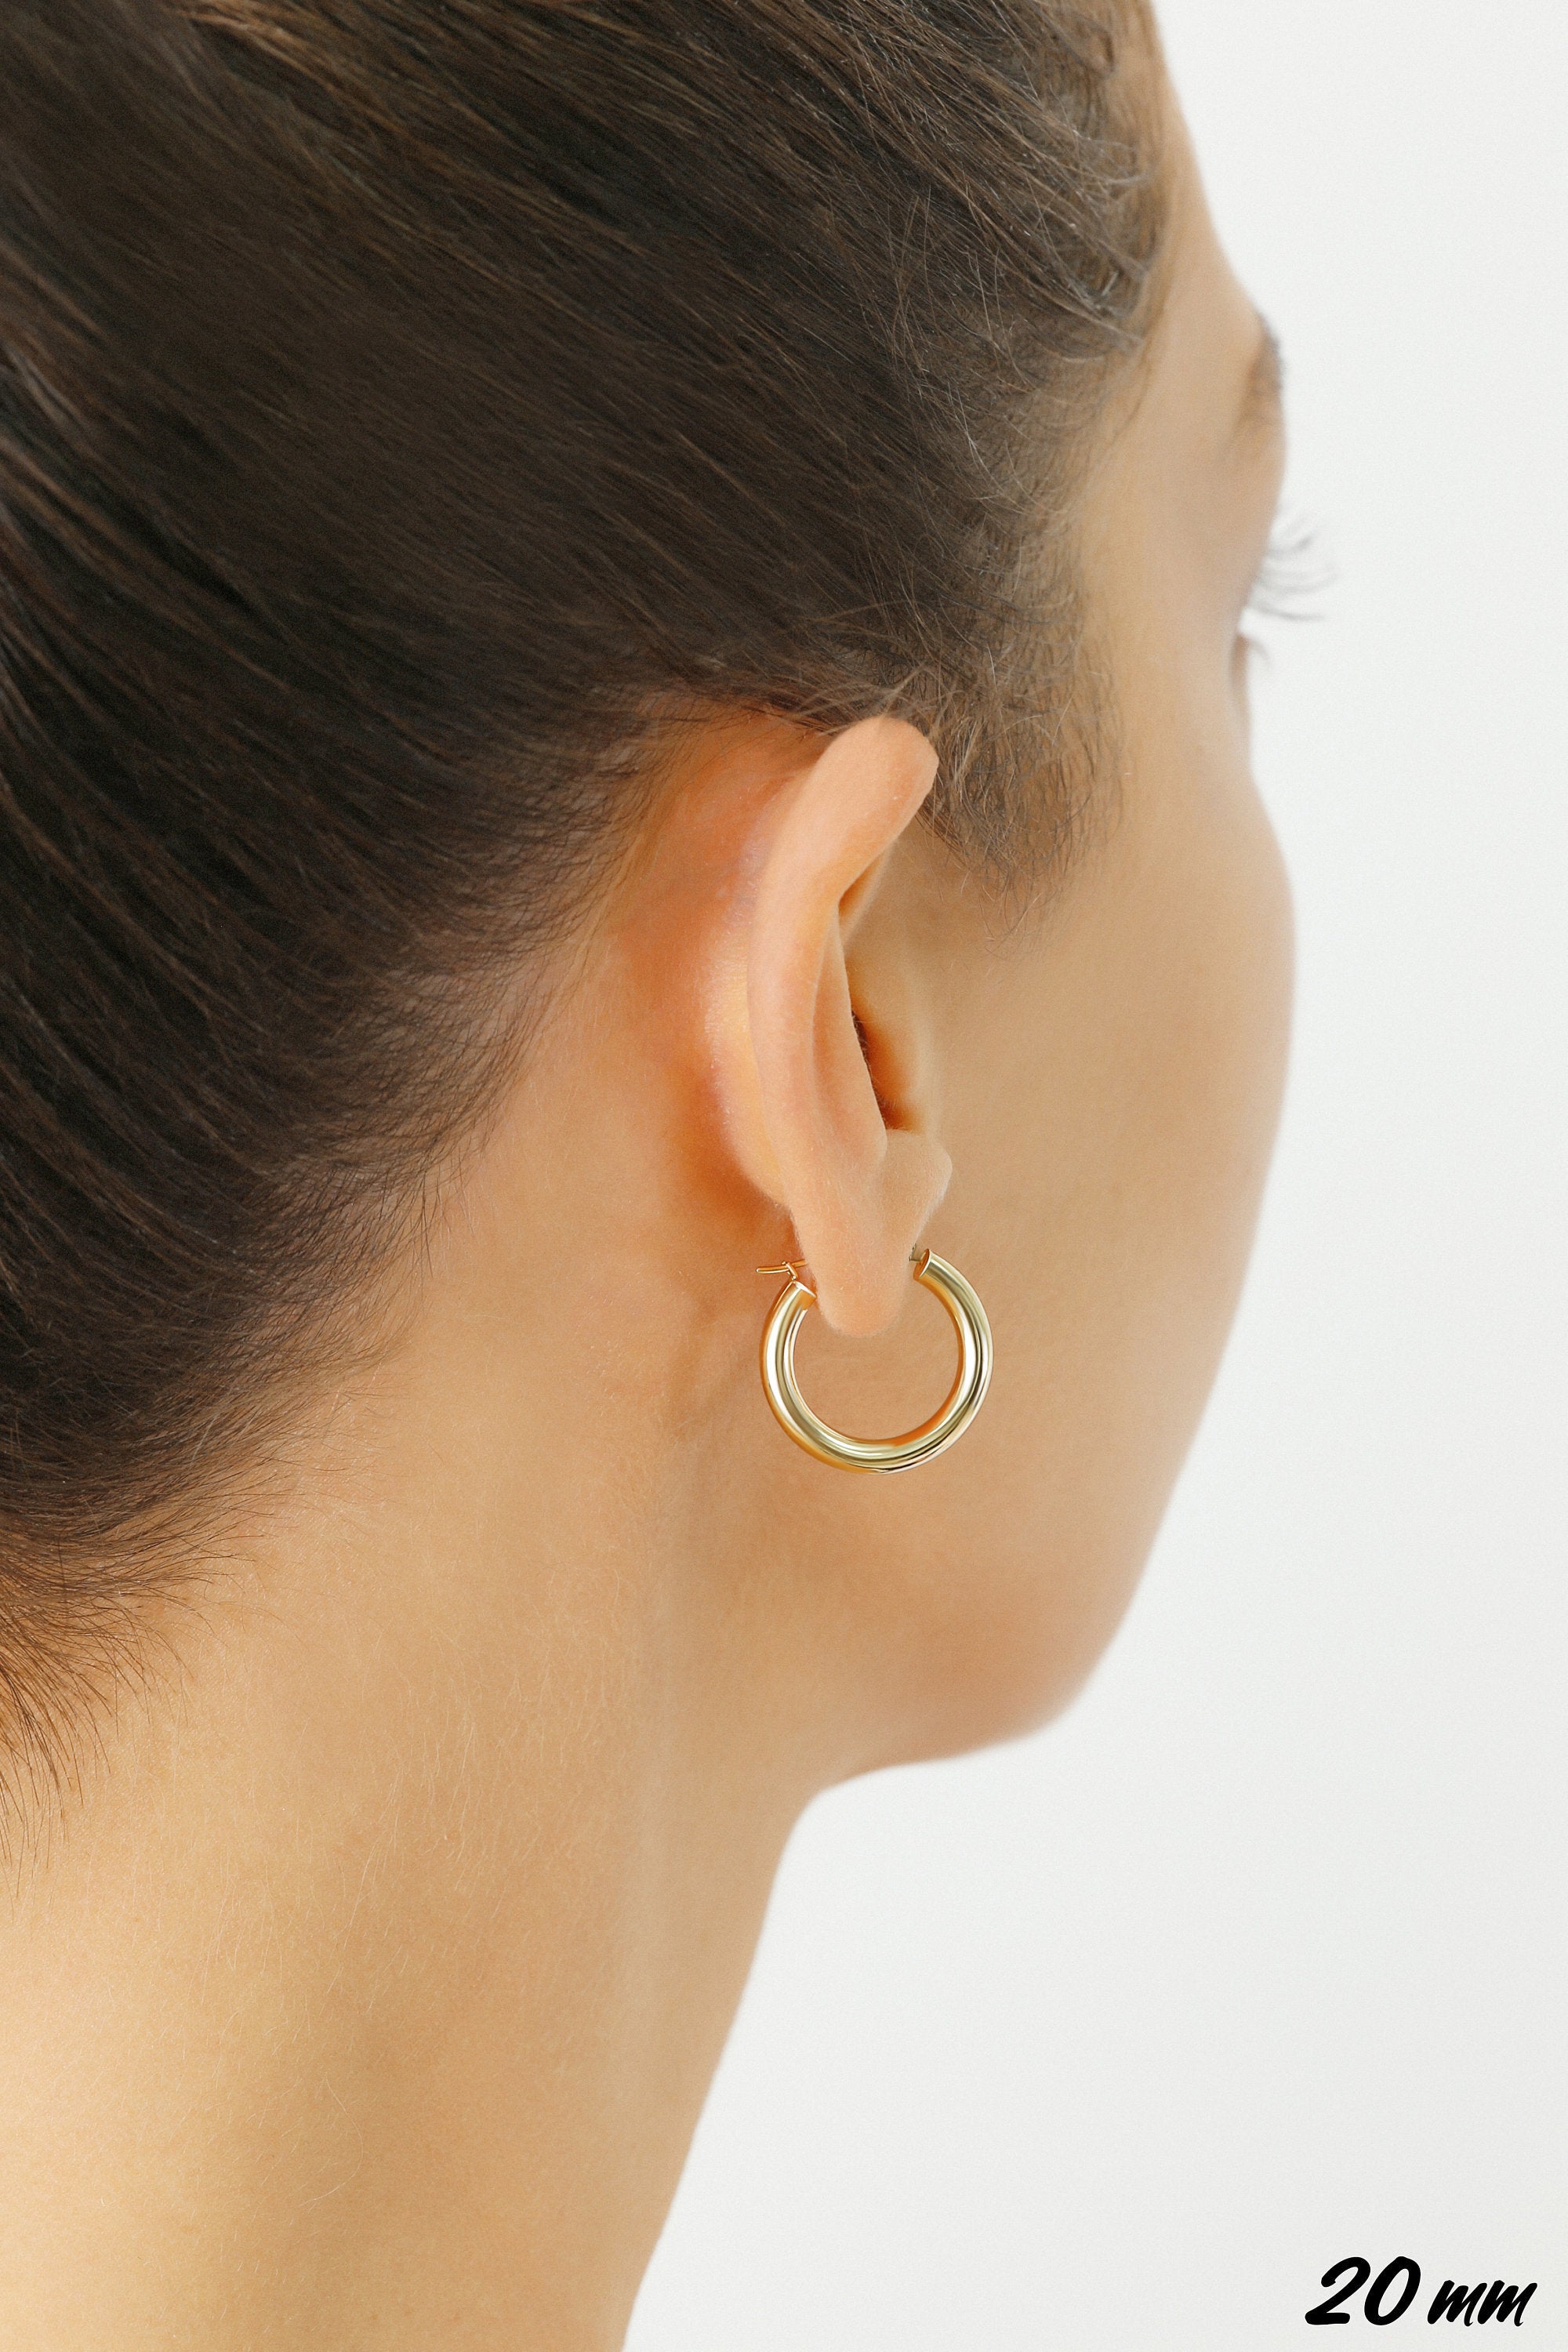 14k Yellow Gold Chunky Hoop Earrings, 3mm Thickness 